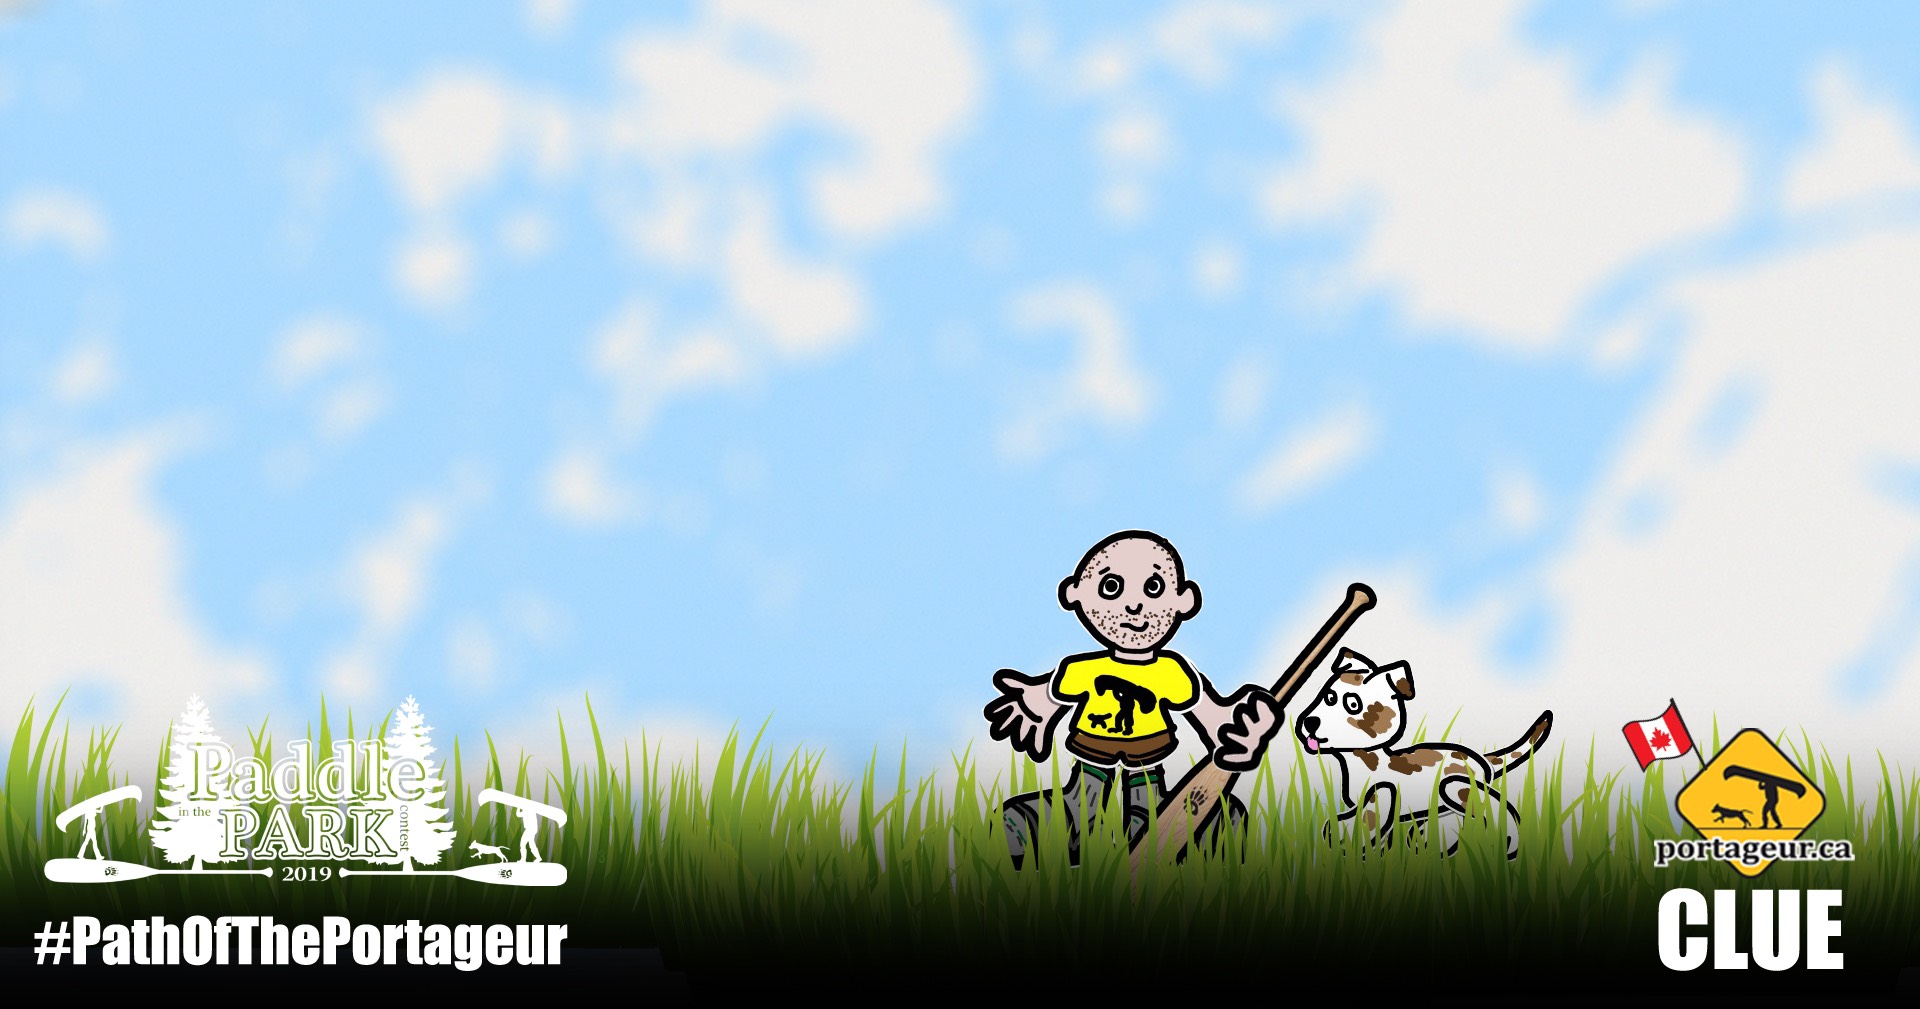 Cartoon version of Preston and Nancy in an outdoor scene with grass and blue skies for CLUE #3 with a Canadian Flag